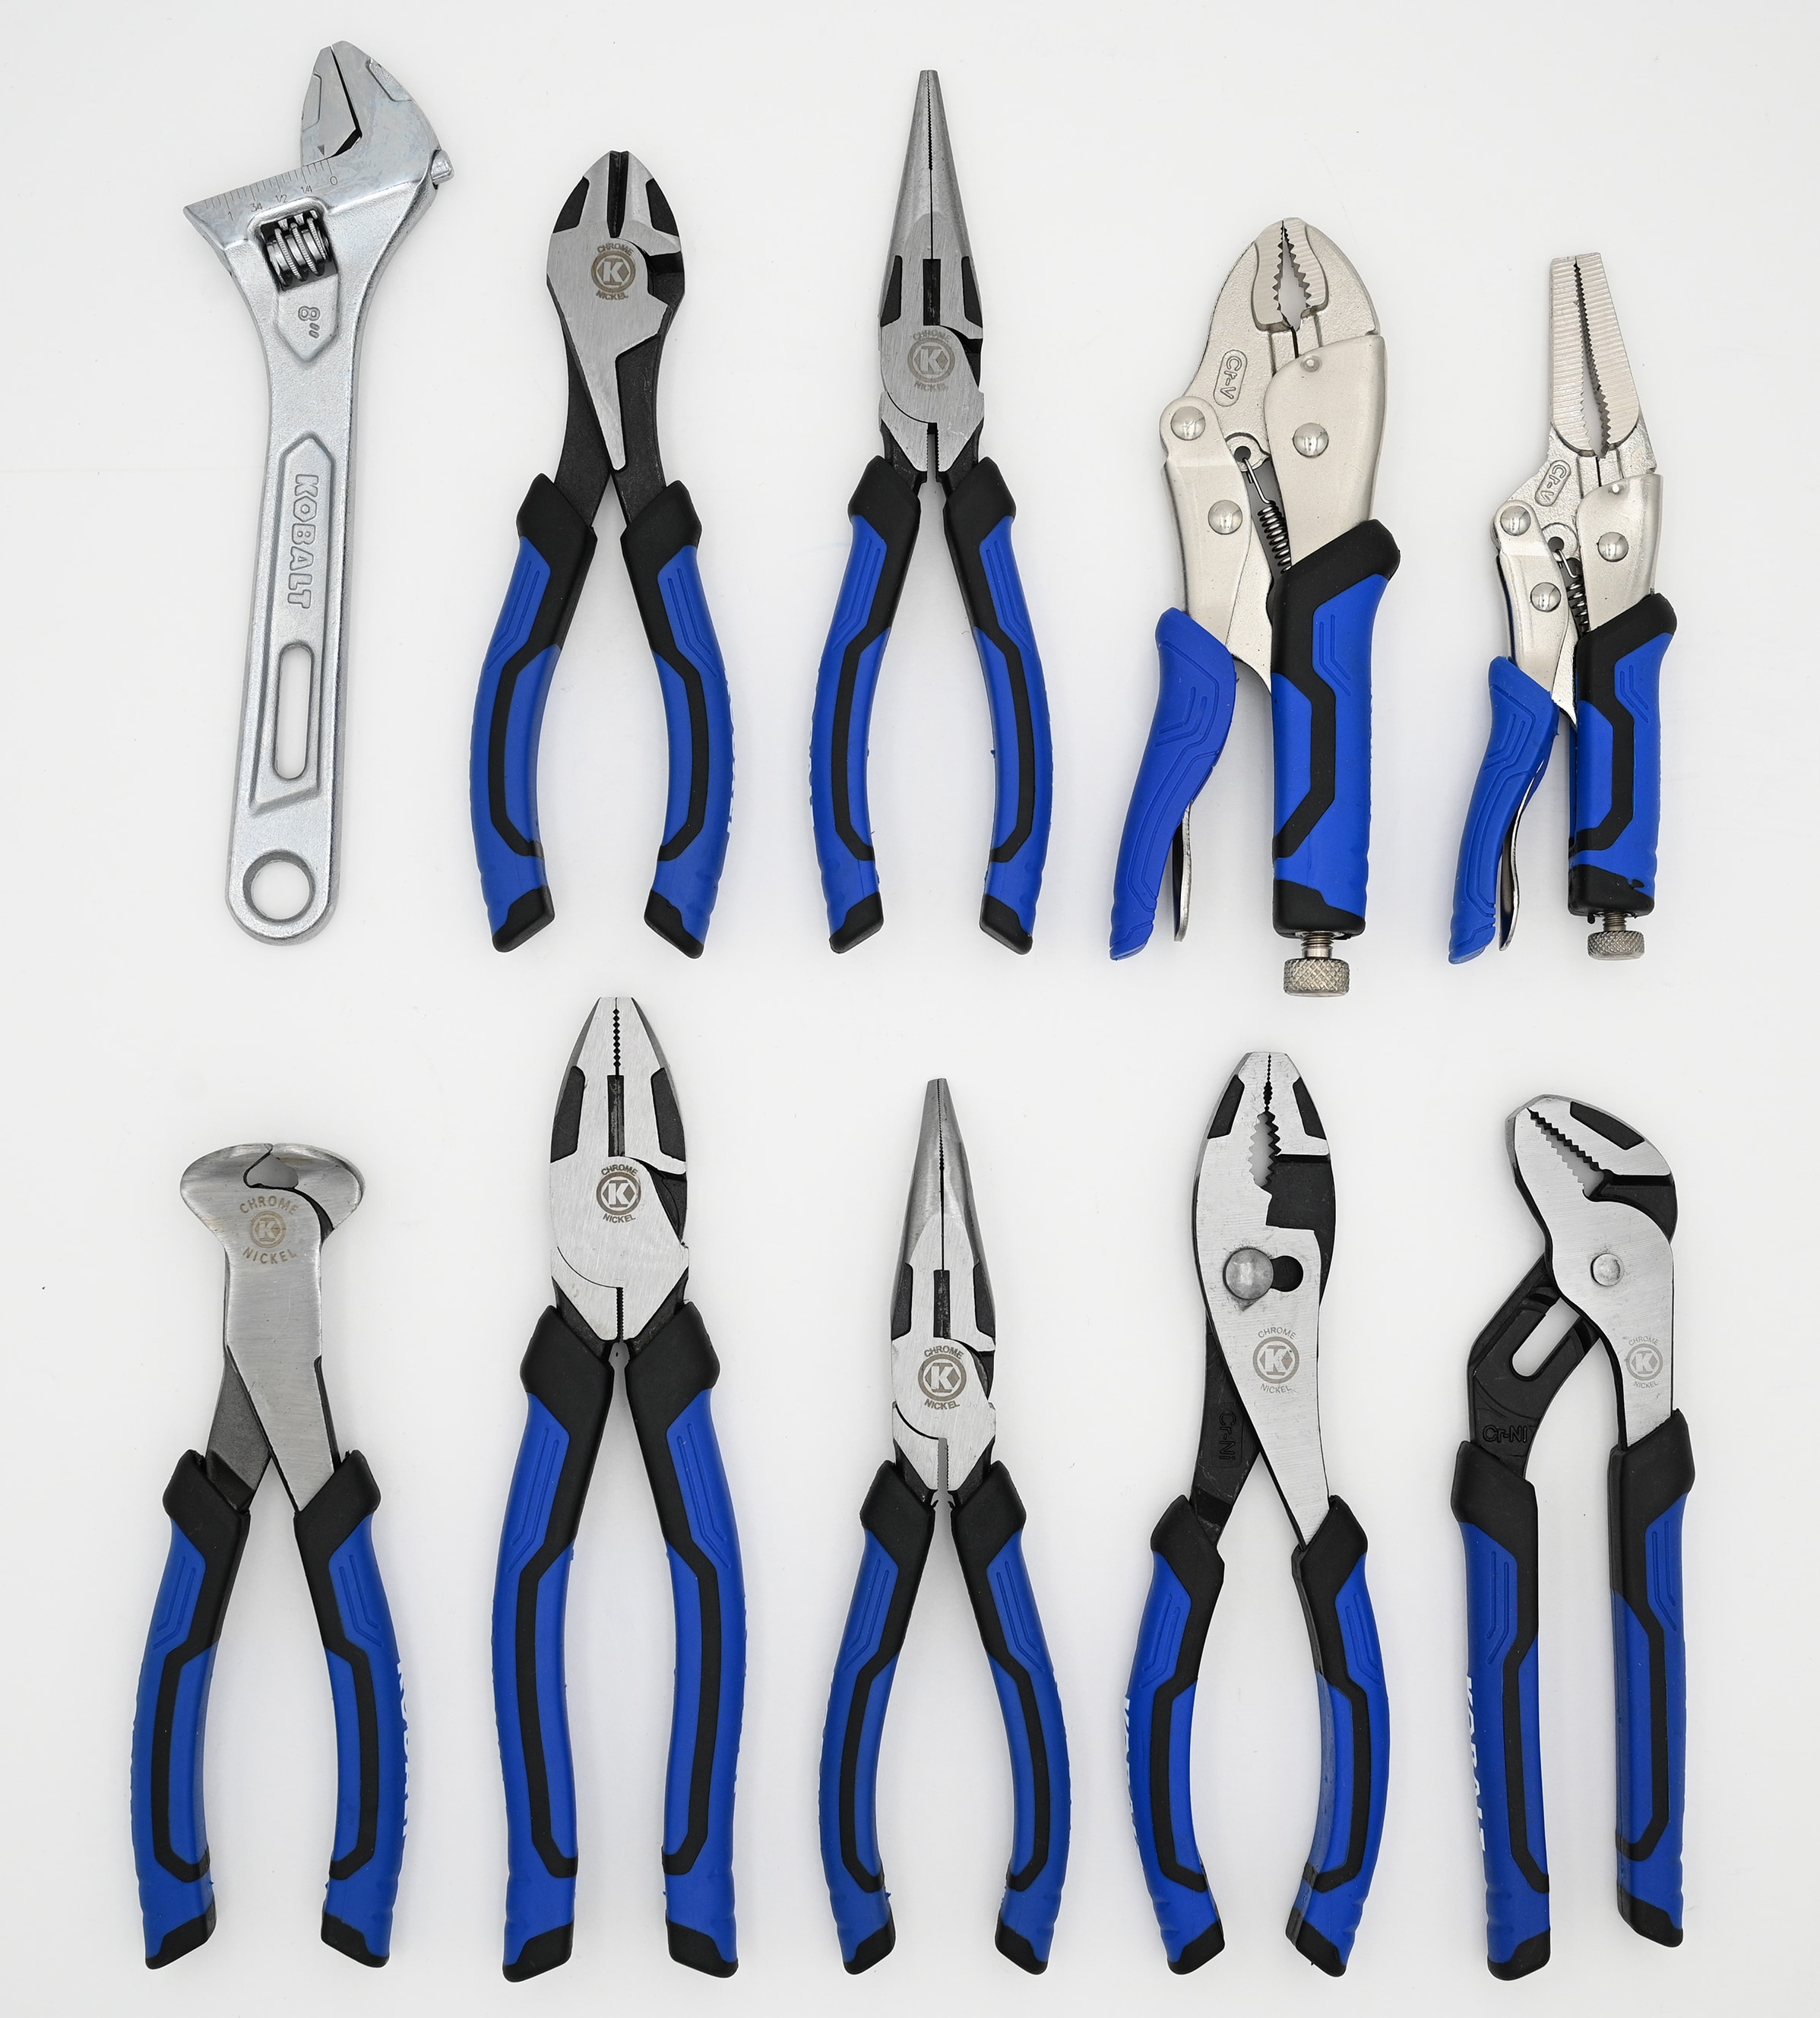 IRWIN VISE-GRIP ProPliers 4-Pack Assorted Pliers with Hard Case in